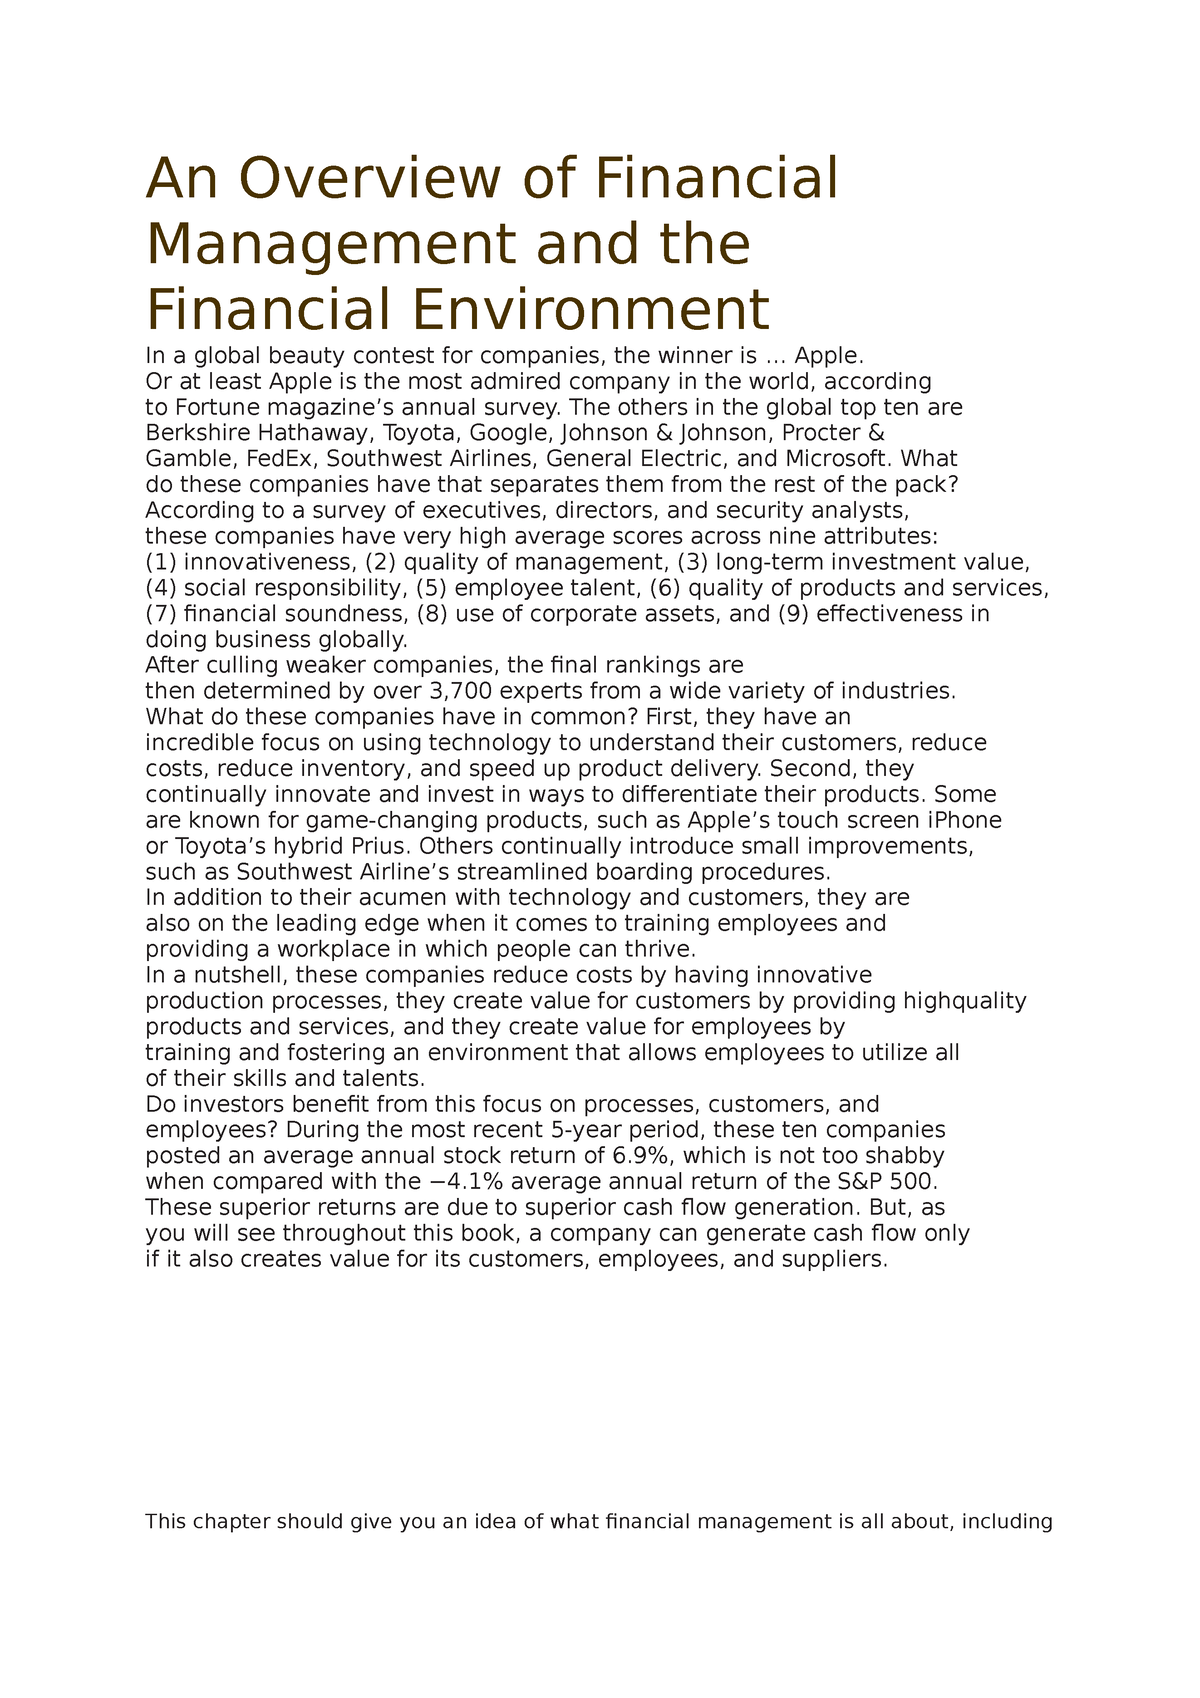 research paper on importance of financial management